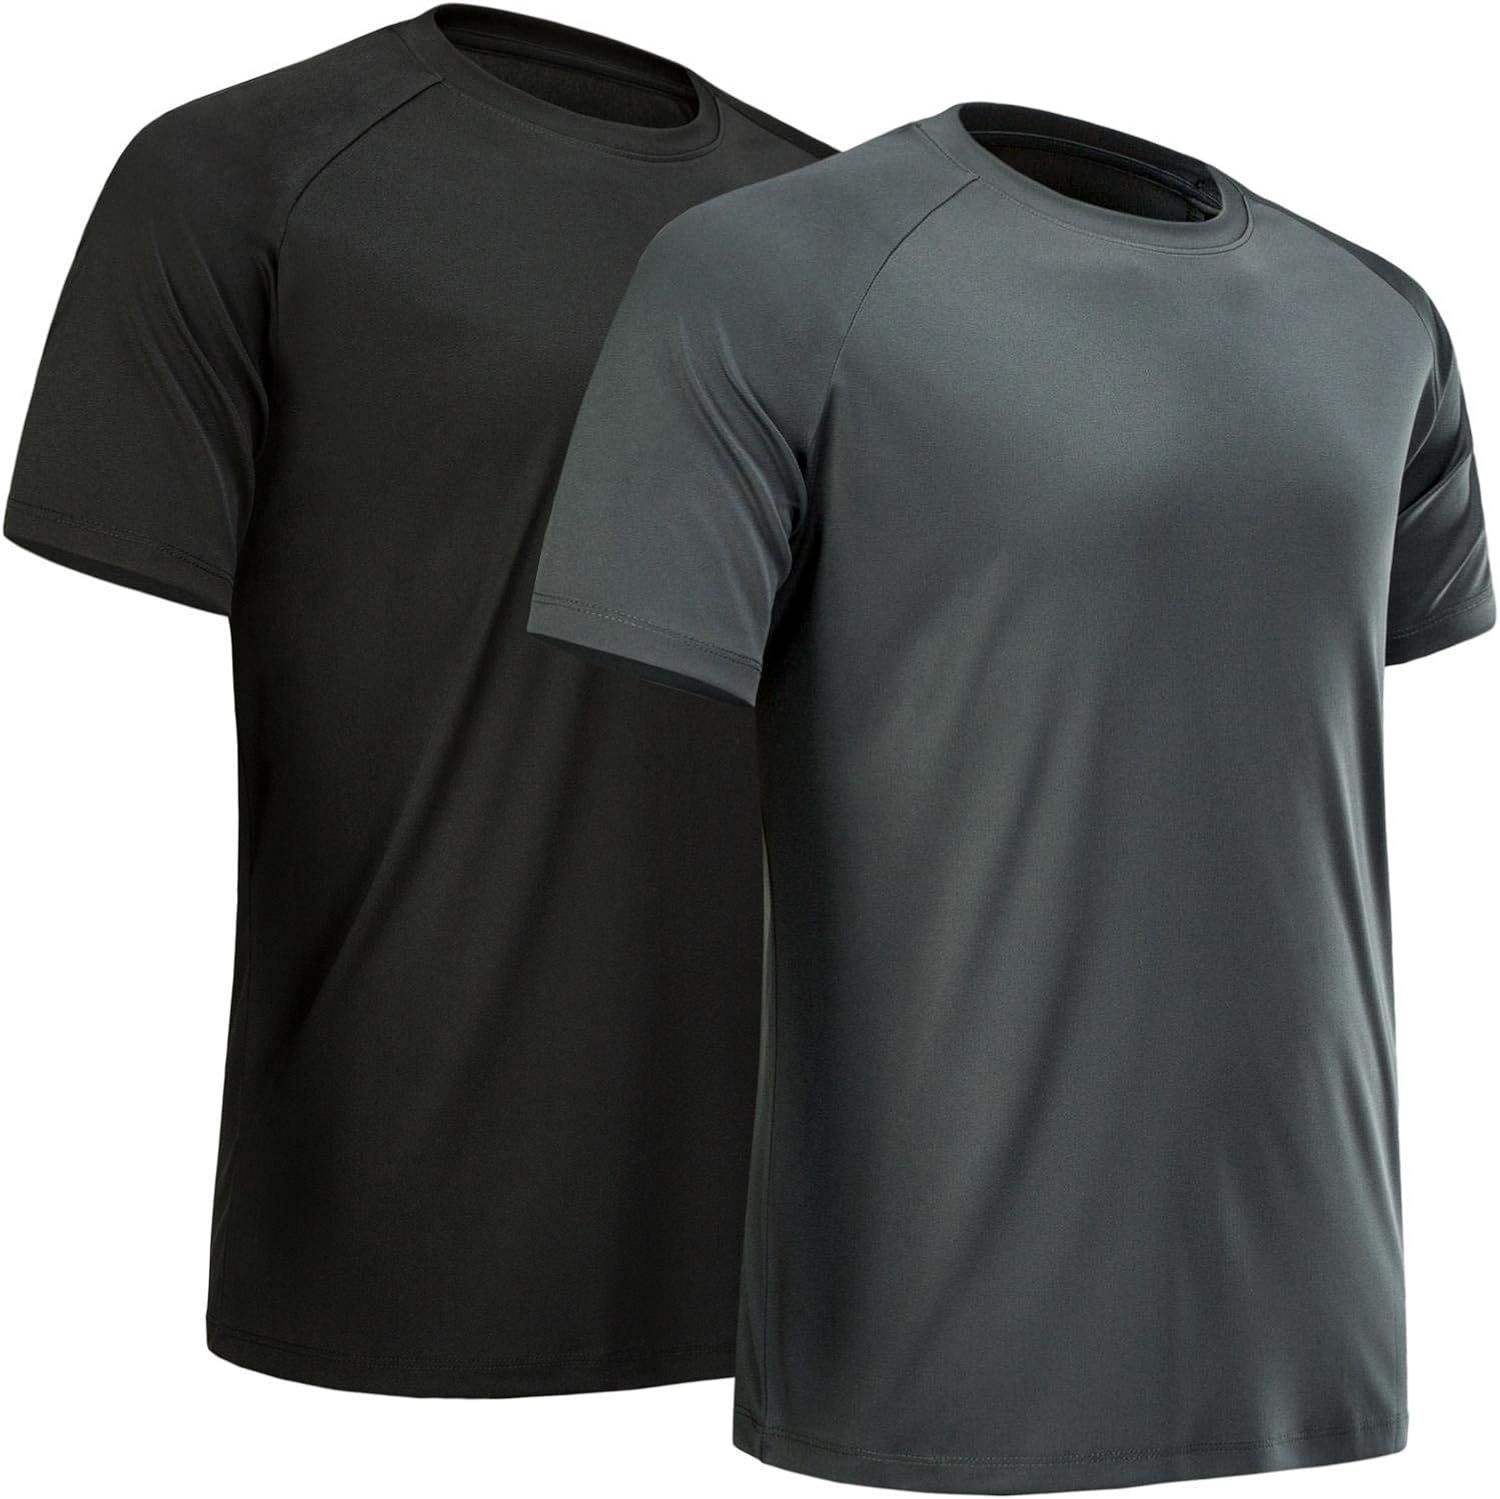 MCPORO Workout Shirts for Men Short Sleeve Quick Dry Athletic Gym Active T Shirt Moisture Wicking | Amazon (US)